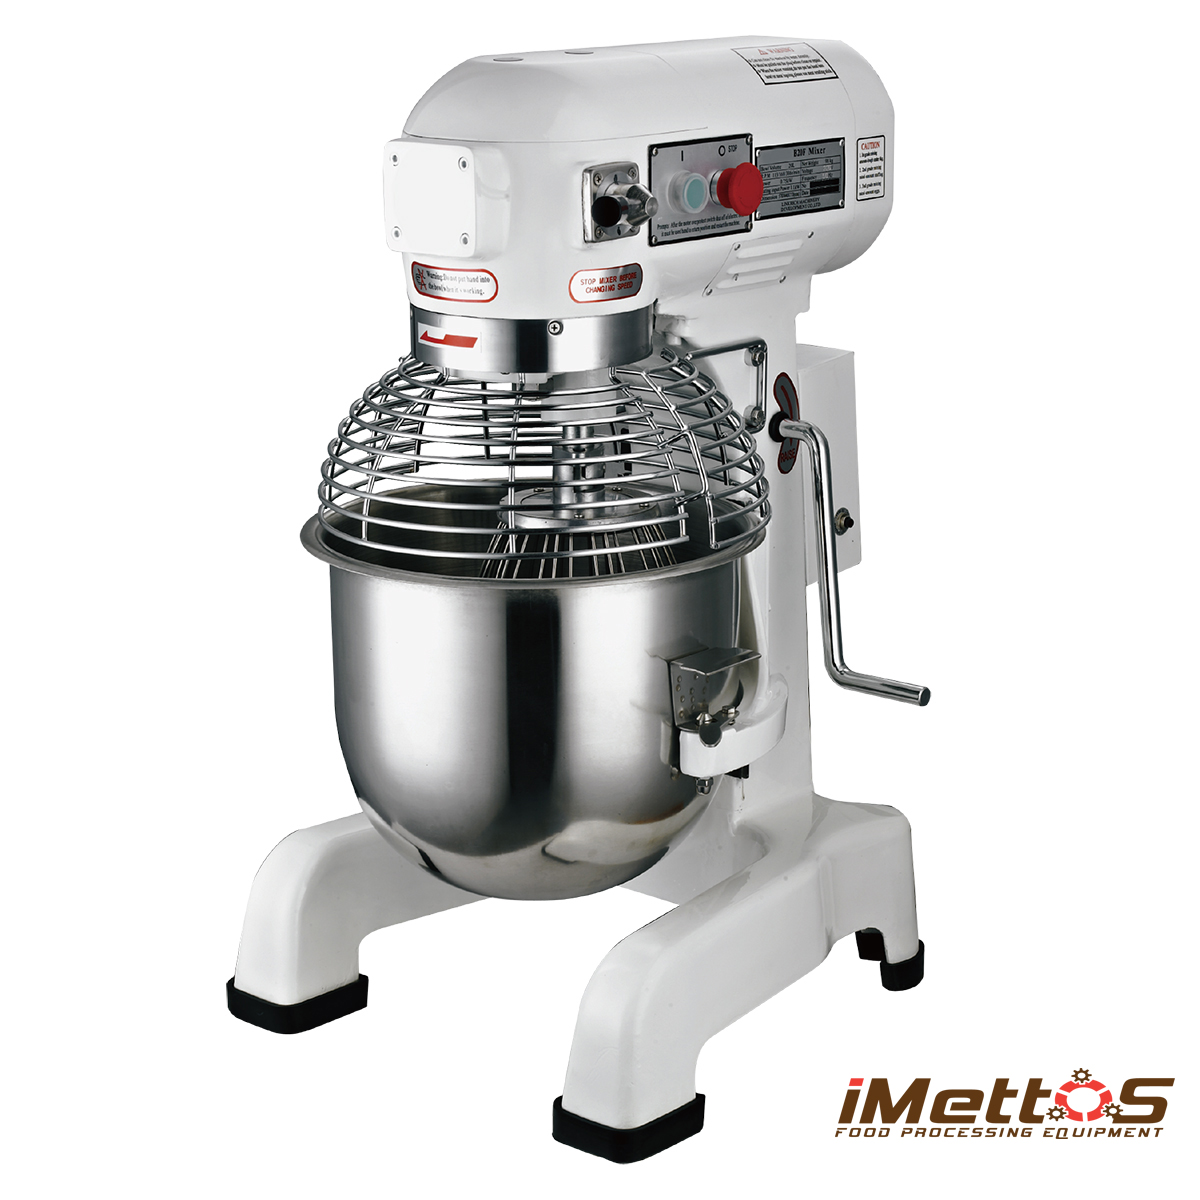 NEW B20 Heavy duty planetary food mixer with stainless steel bowl